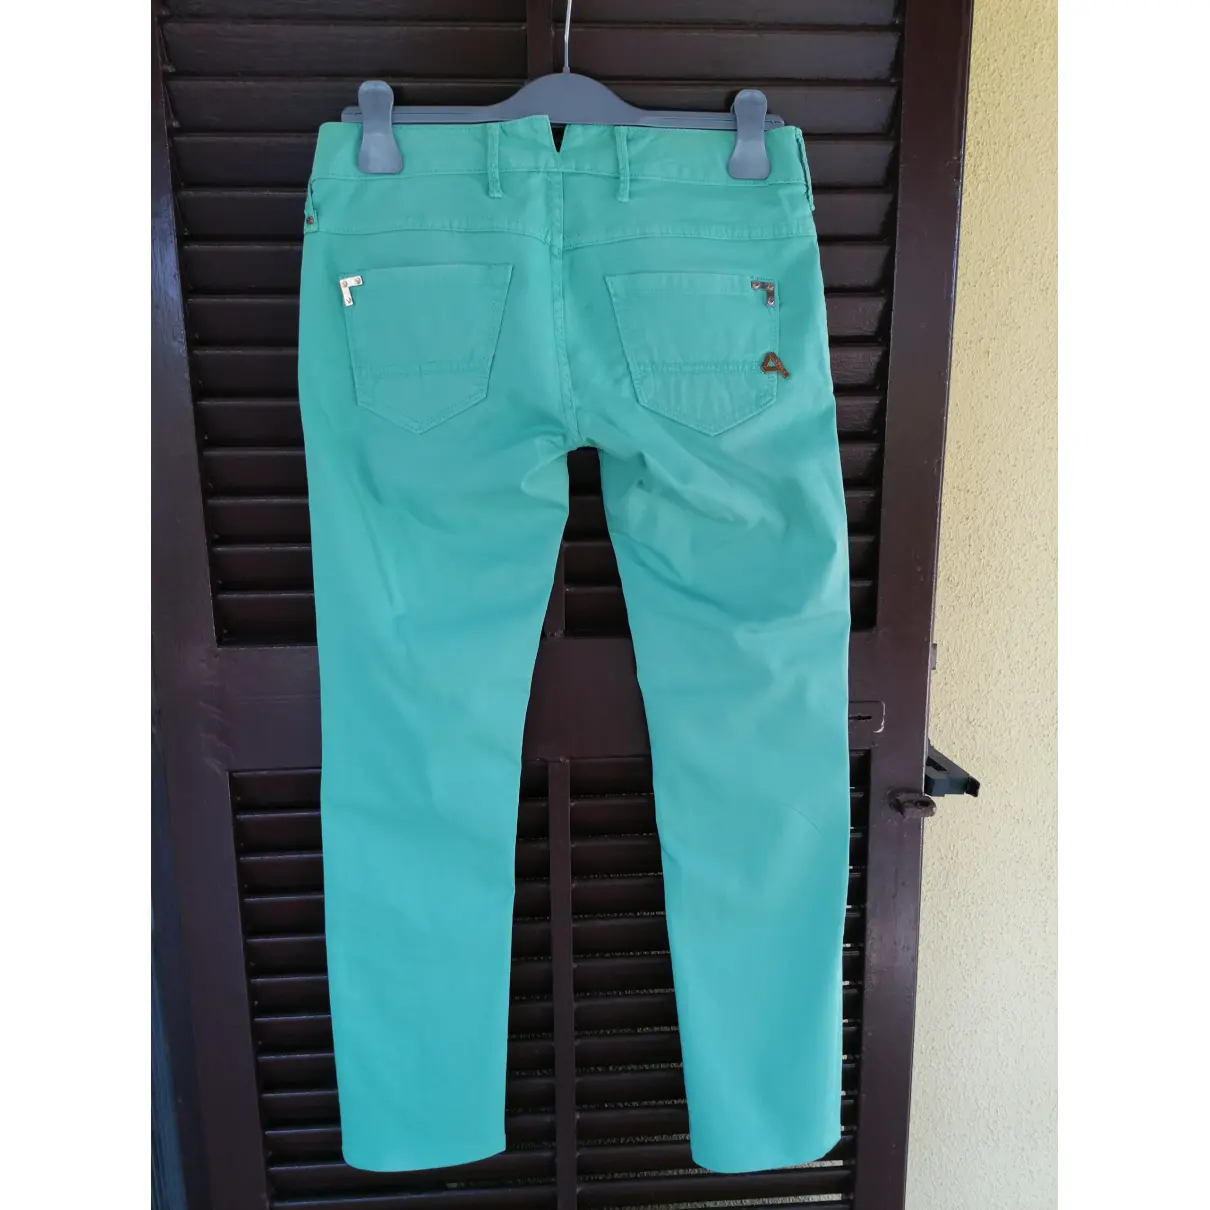 Buy Cycle Jeans online